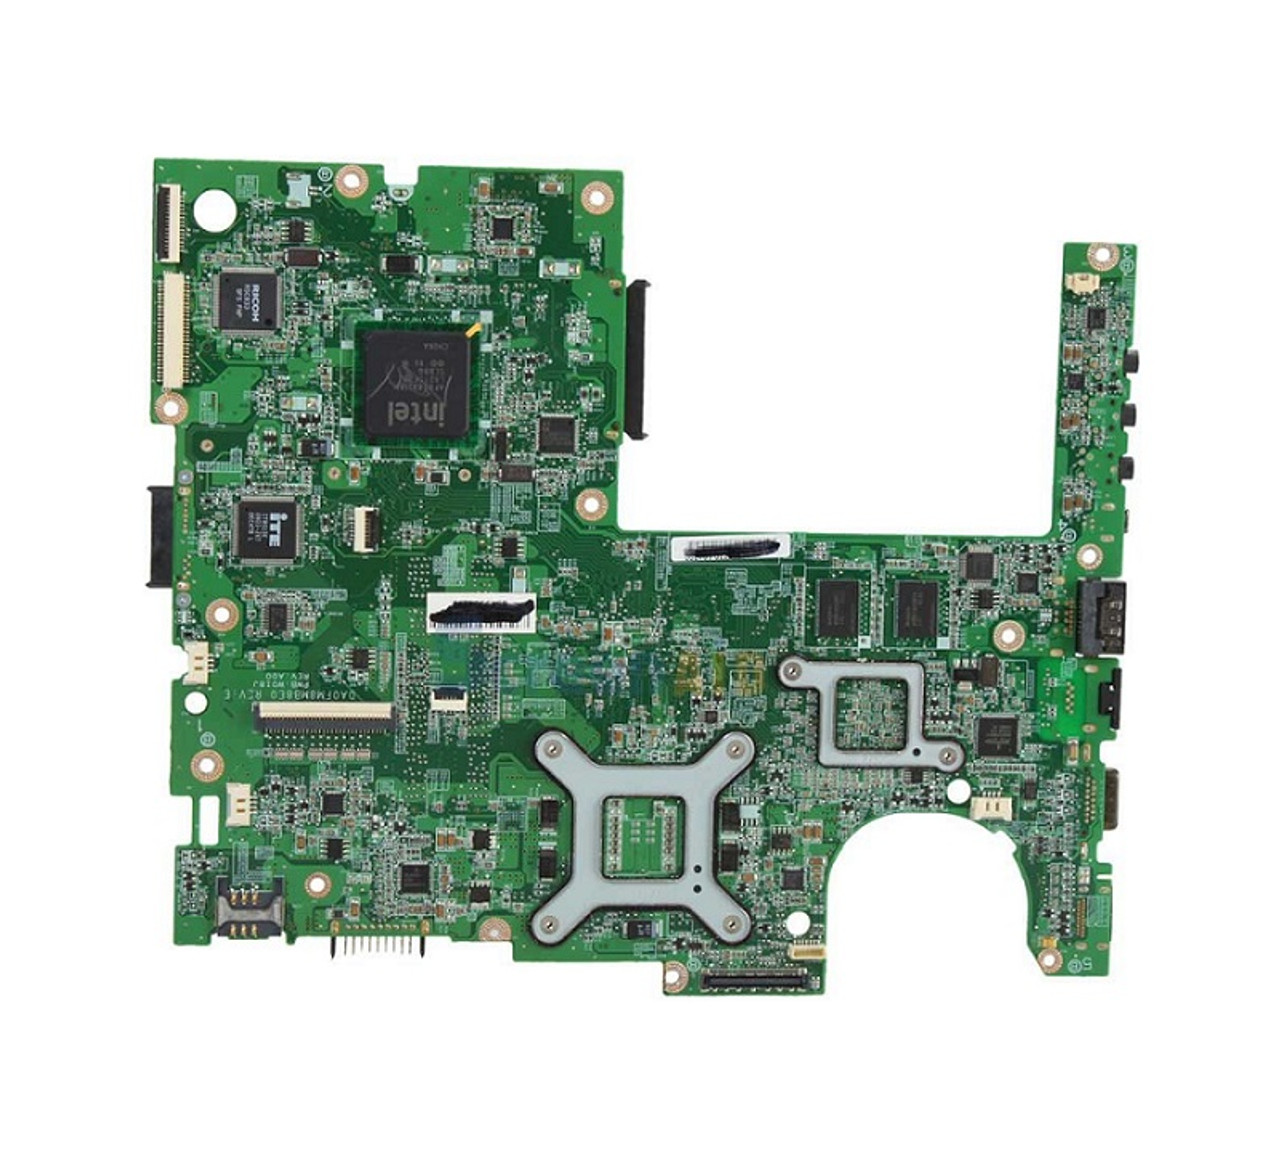 582995-001 - HP System Board (MotherBoard) for Dm3 Notebook PC (Refurbished)